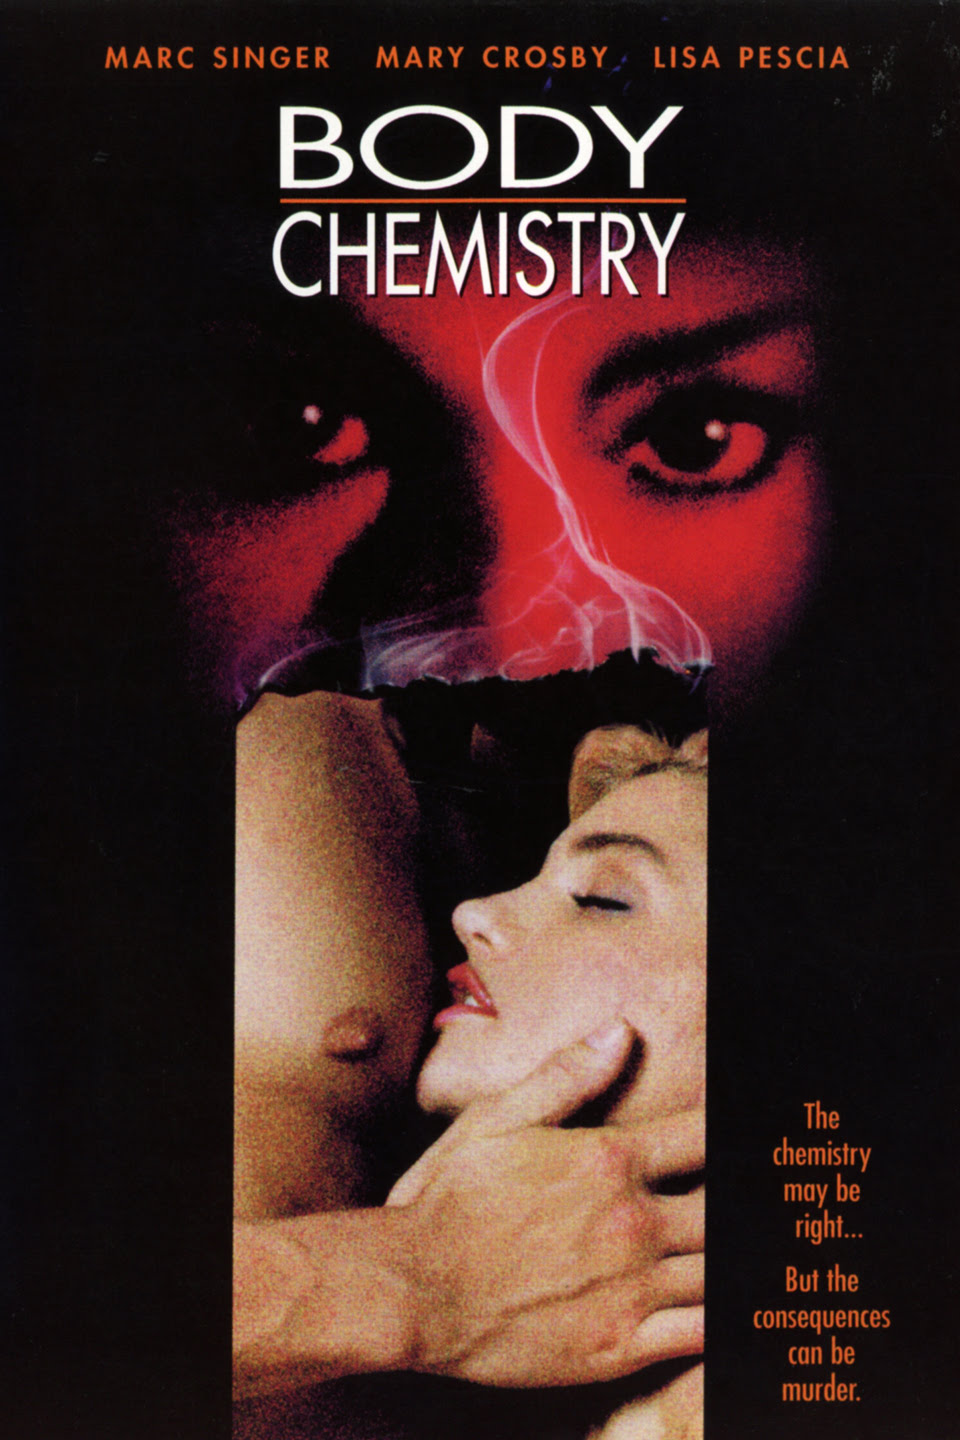 Download [18+] Body Chemistry (1990) UNRATED DVDRip [In English] Erotic Movie 720p | 480p